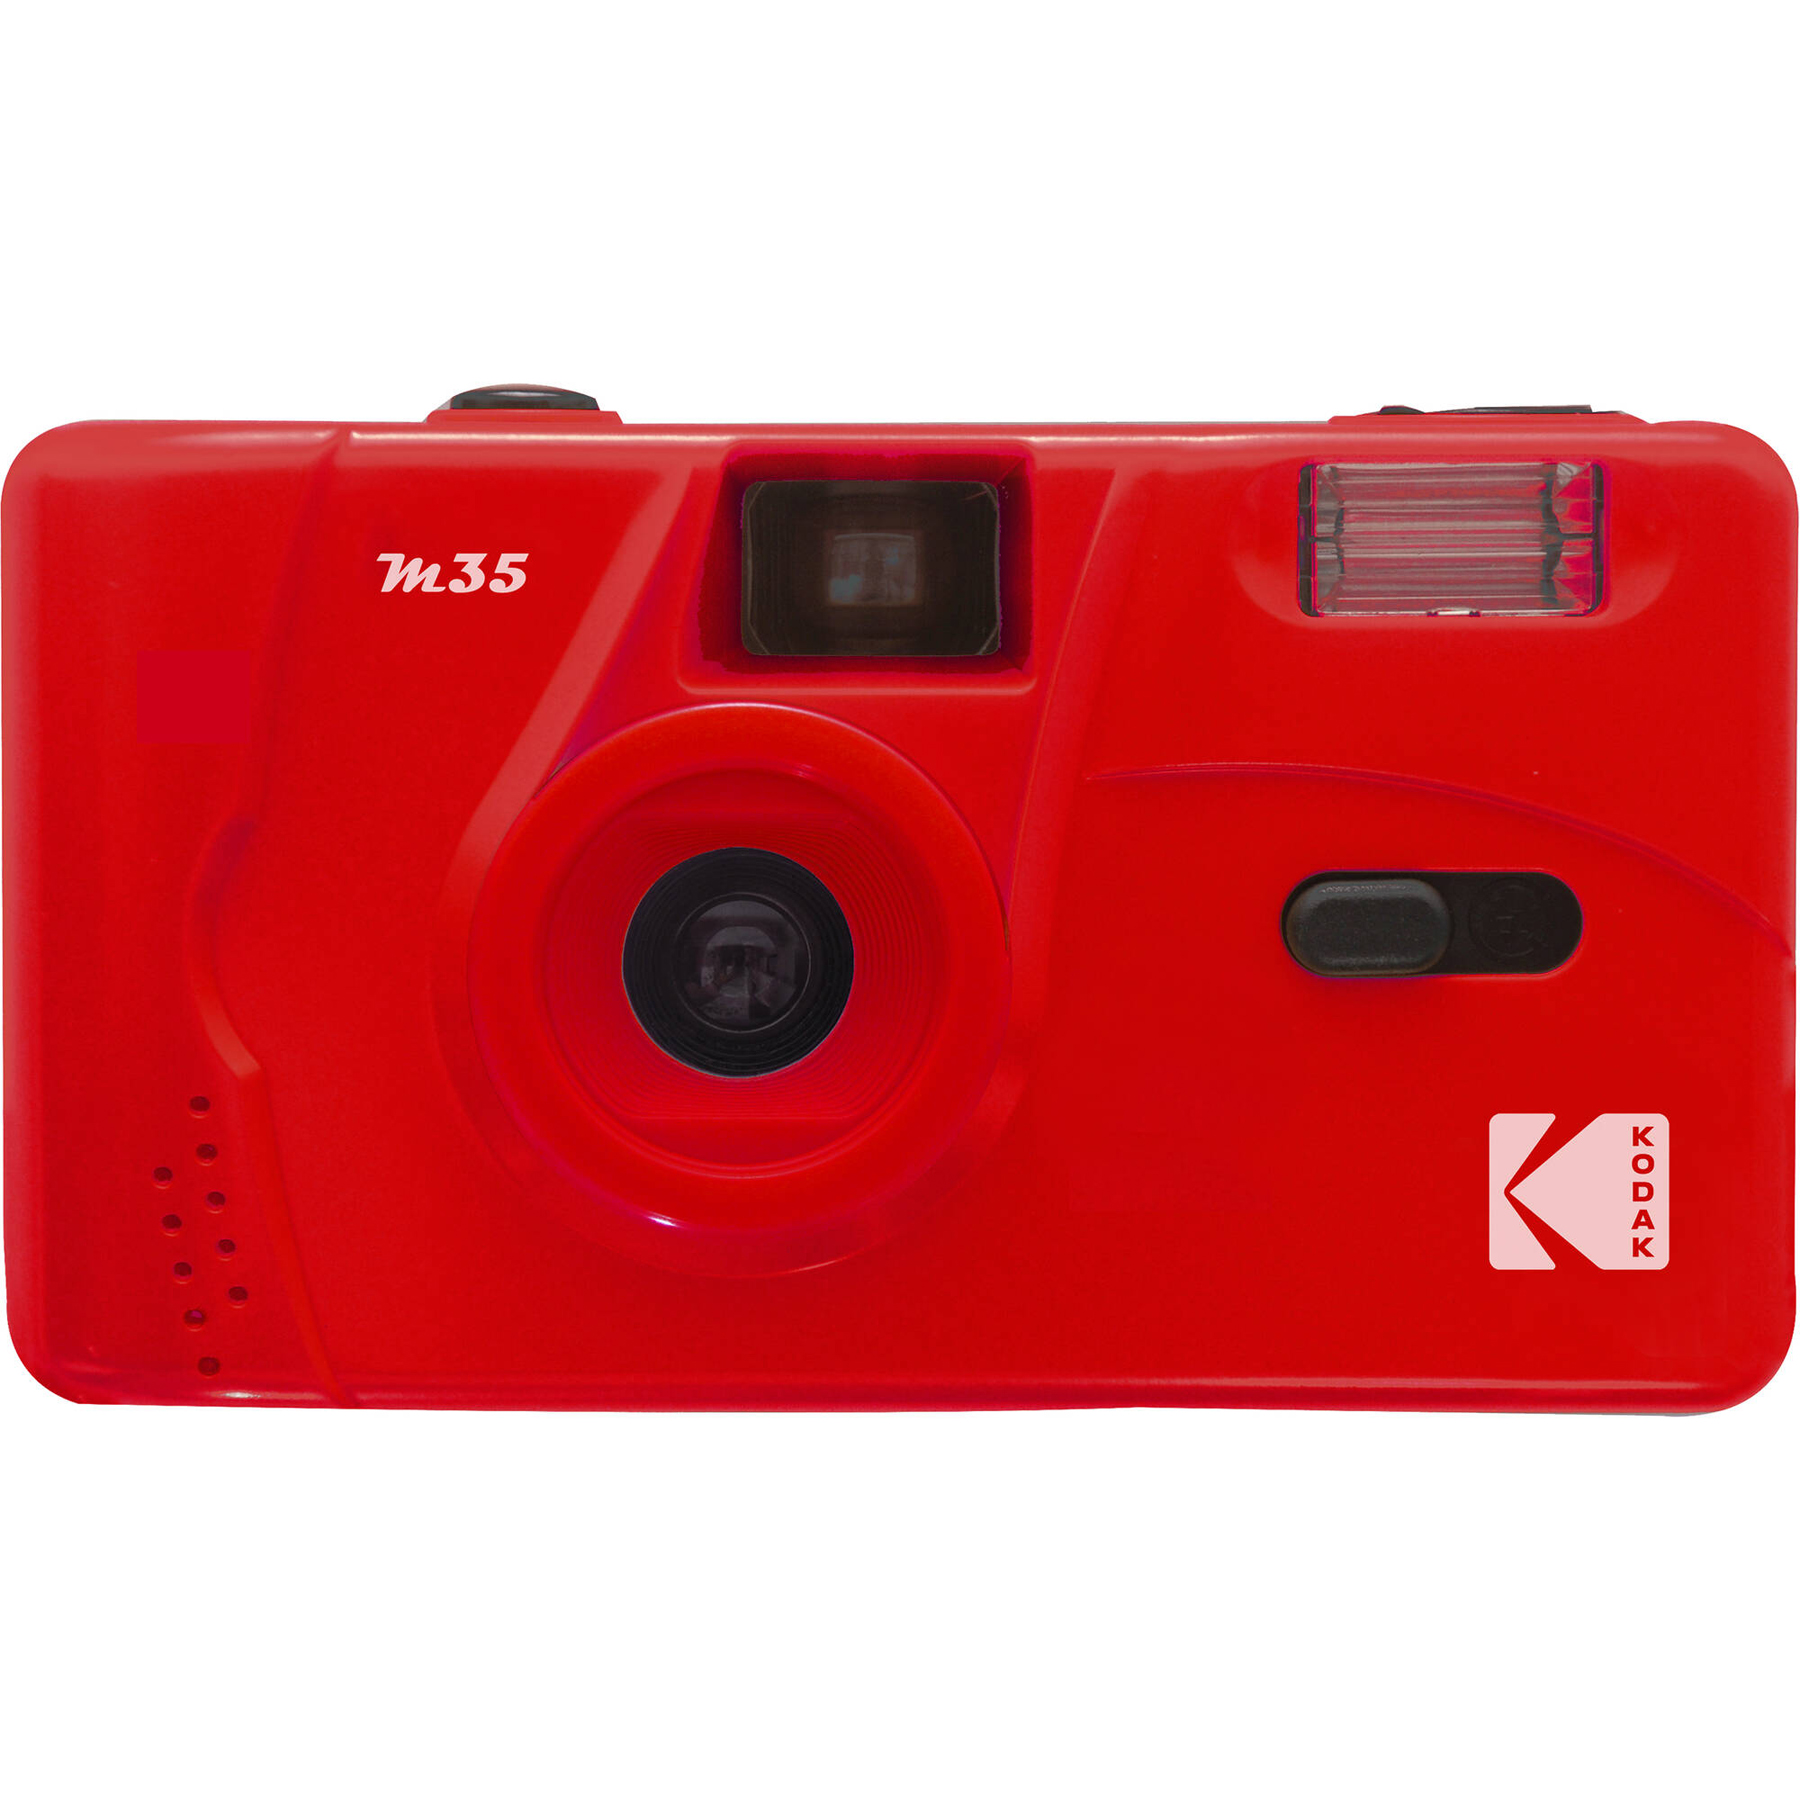 KODAK M35 – 35MM FILM CAMERA -FOCUS FREE, REUSABLE , BUILT IN FLASH , EASY TO USE – RED